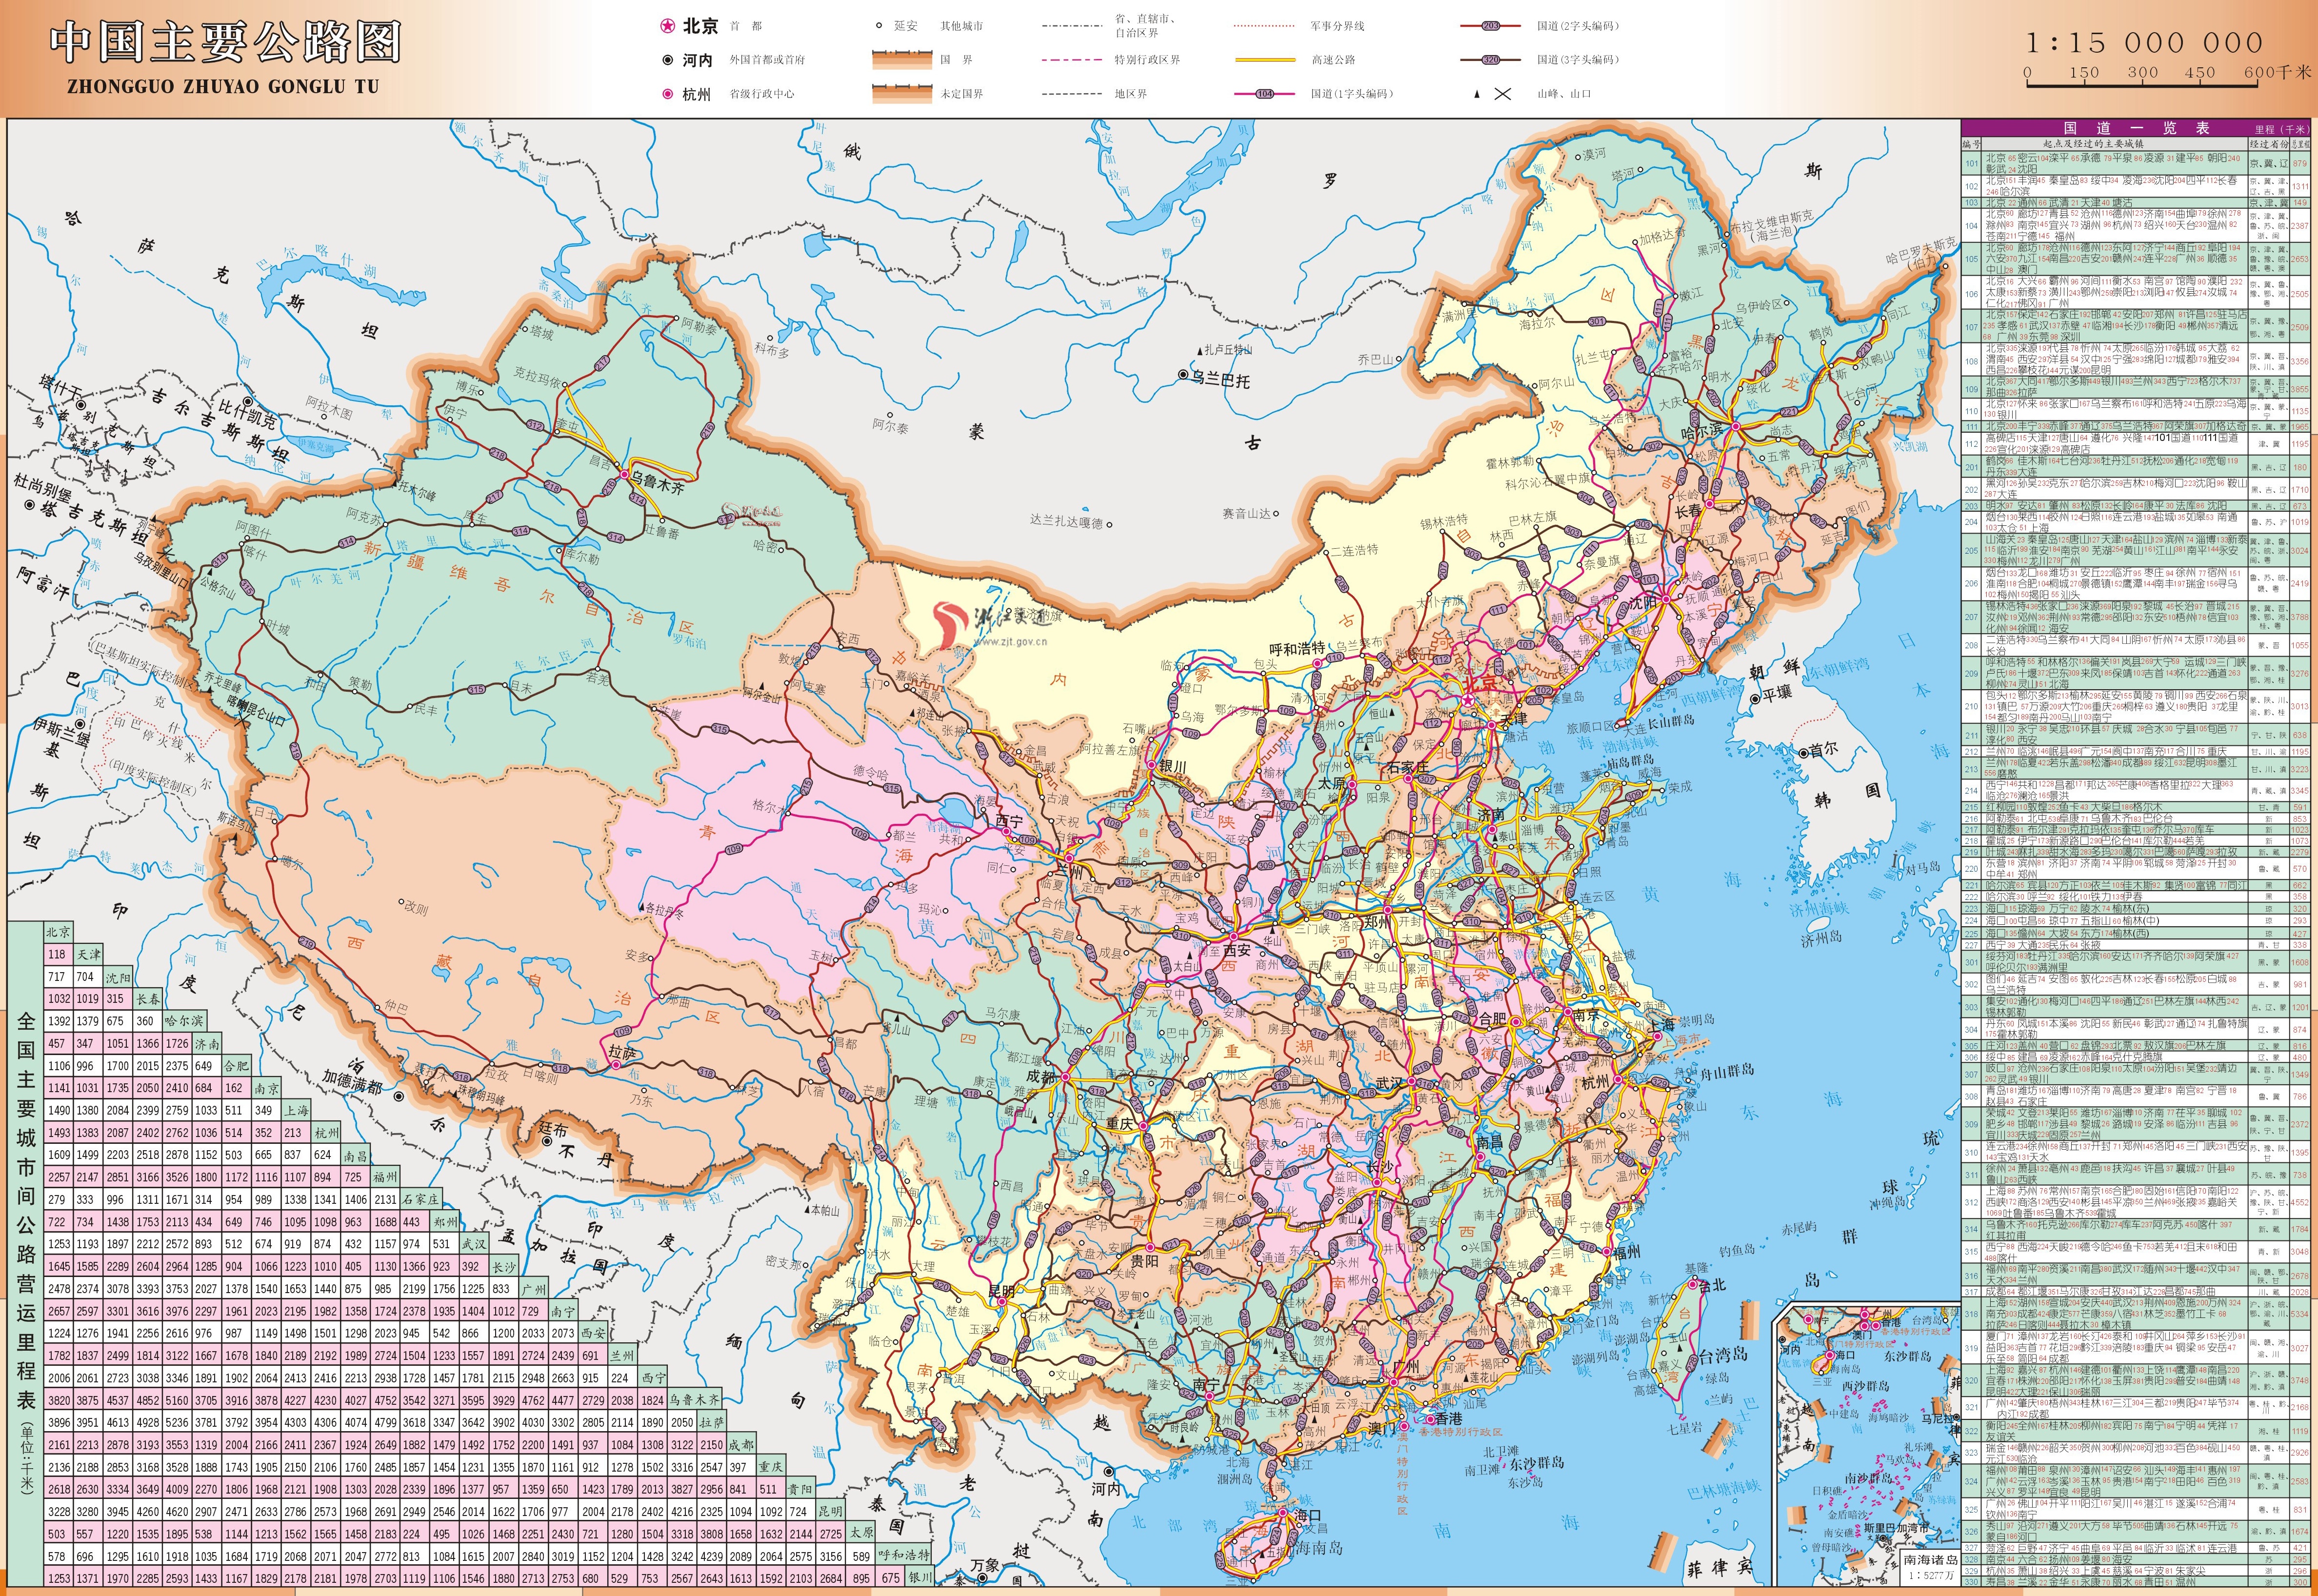  /><br /><br/><p>China Road Map</p></center></center>
<div style='clear: both;'></div>
</div>
<div class='post-footer'>
<div class='post-footer-line post-footer-line-1'>
<div style=